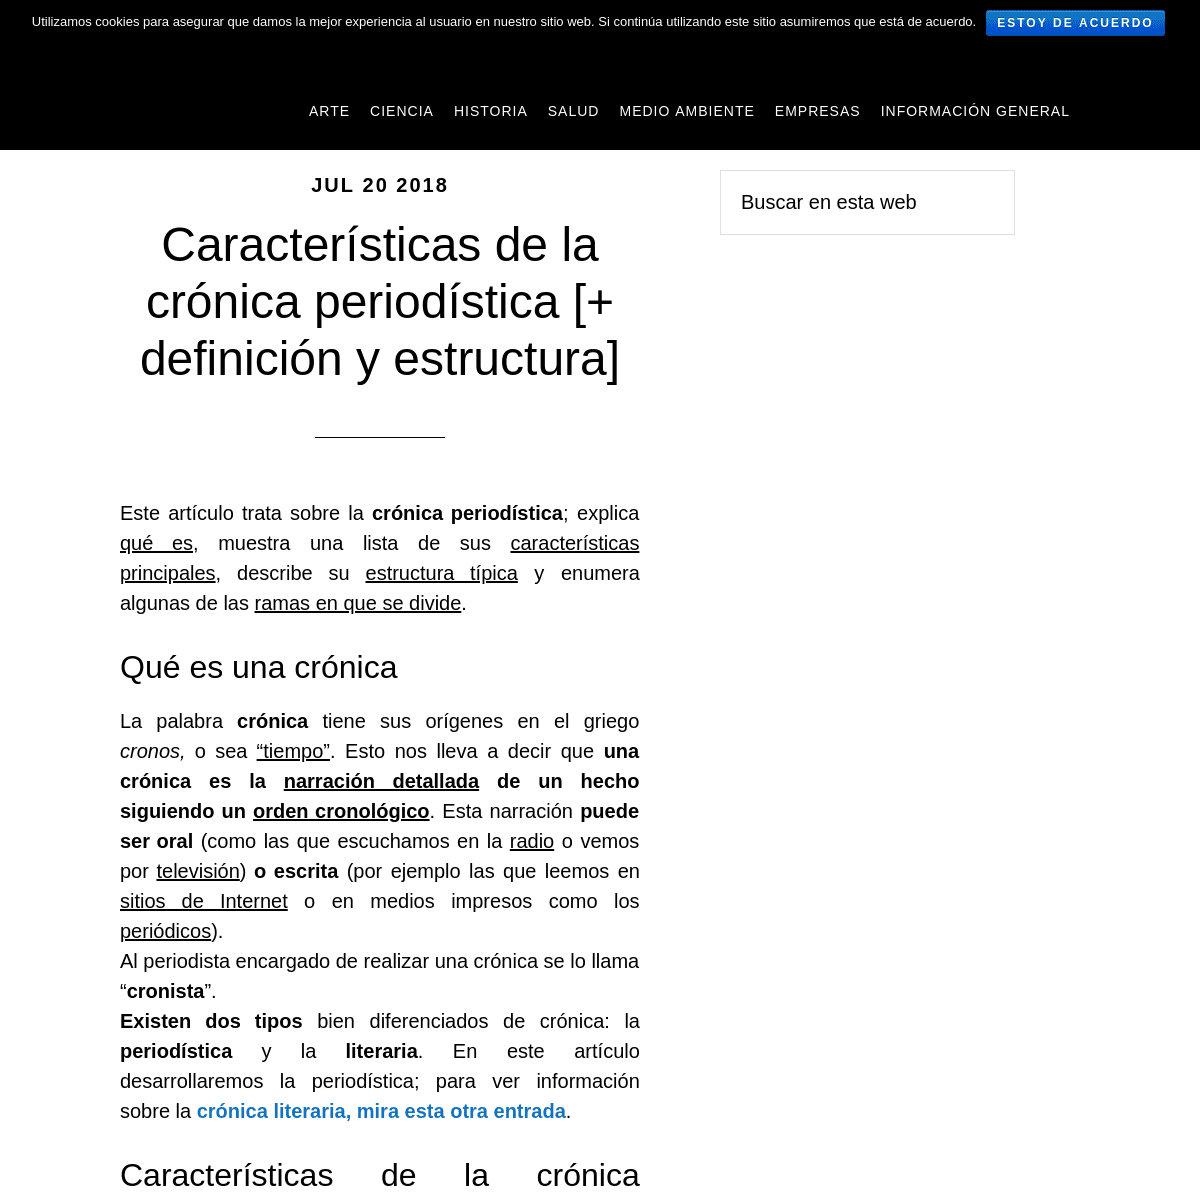 A complete backup of caracteristicas.org